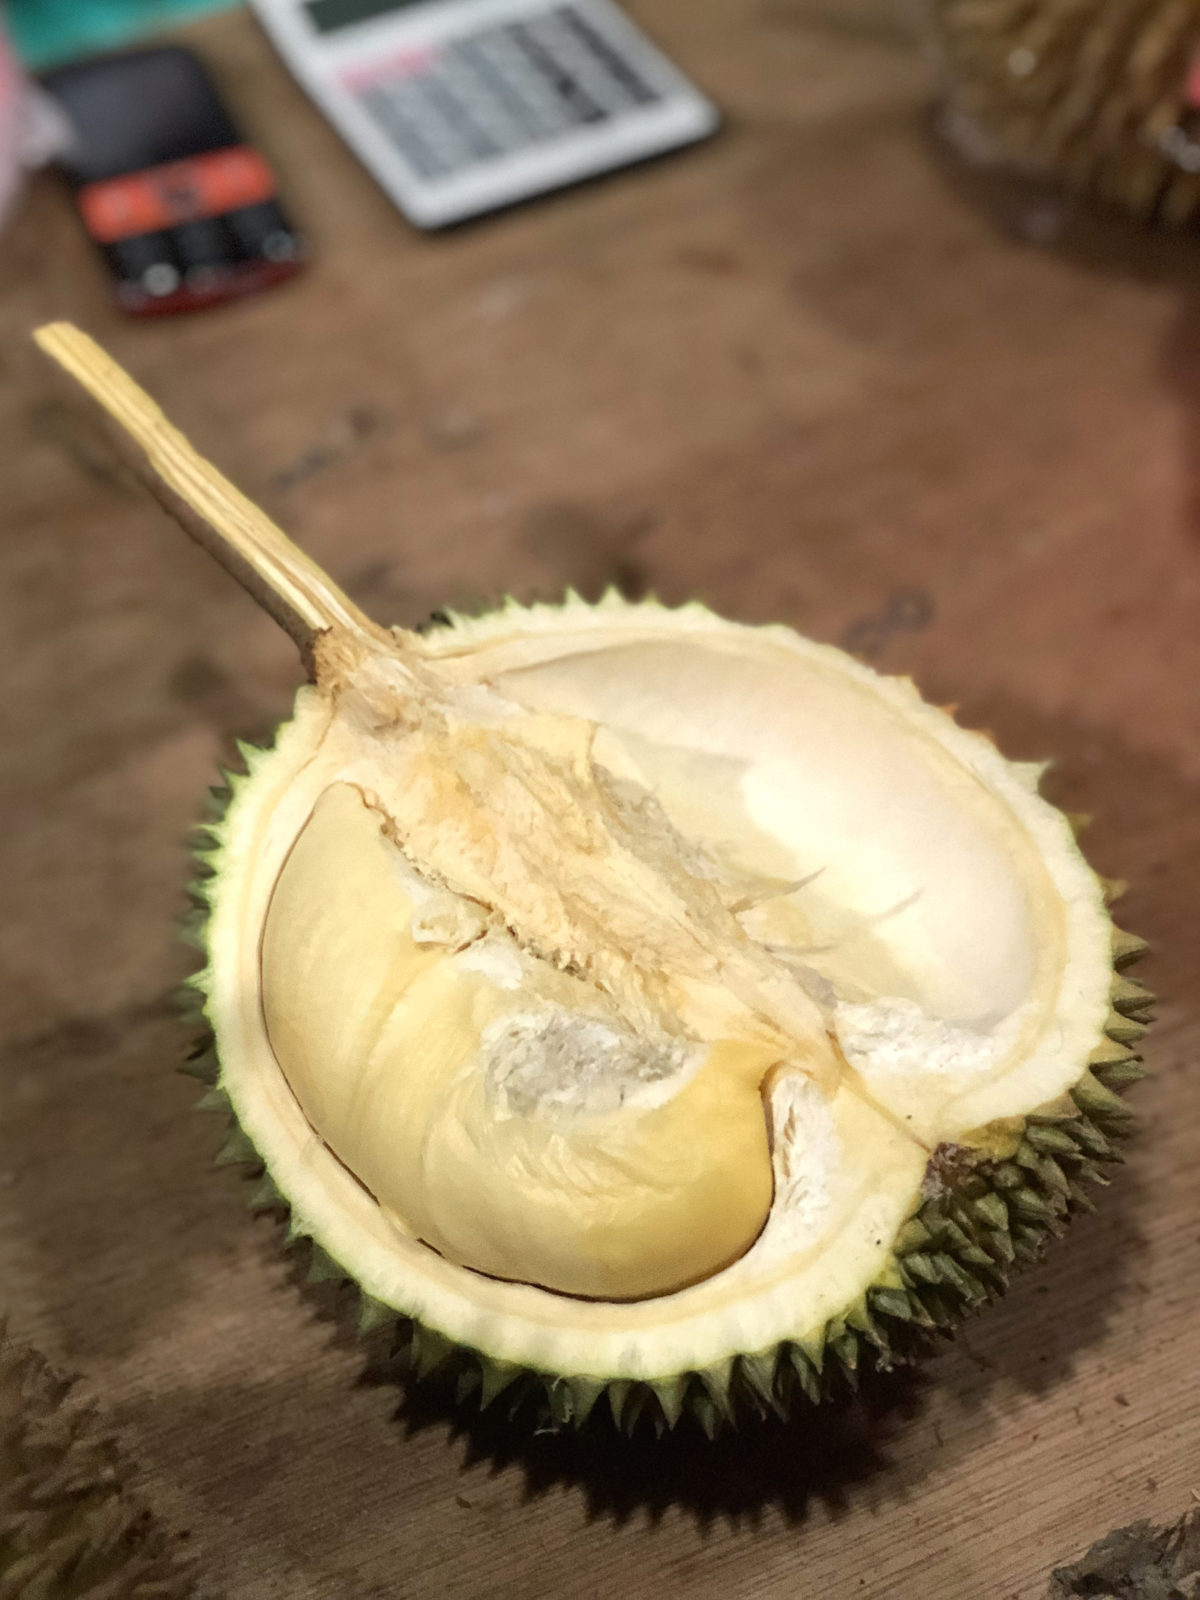 The Best Food in Kuching, Sarawak, According to Locals | Jayndee